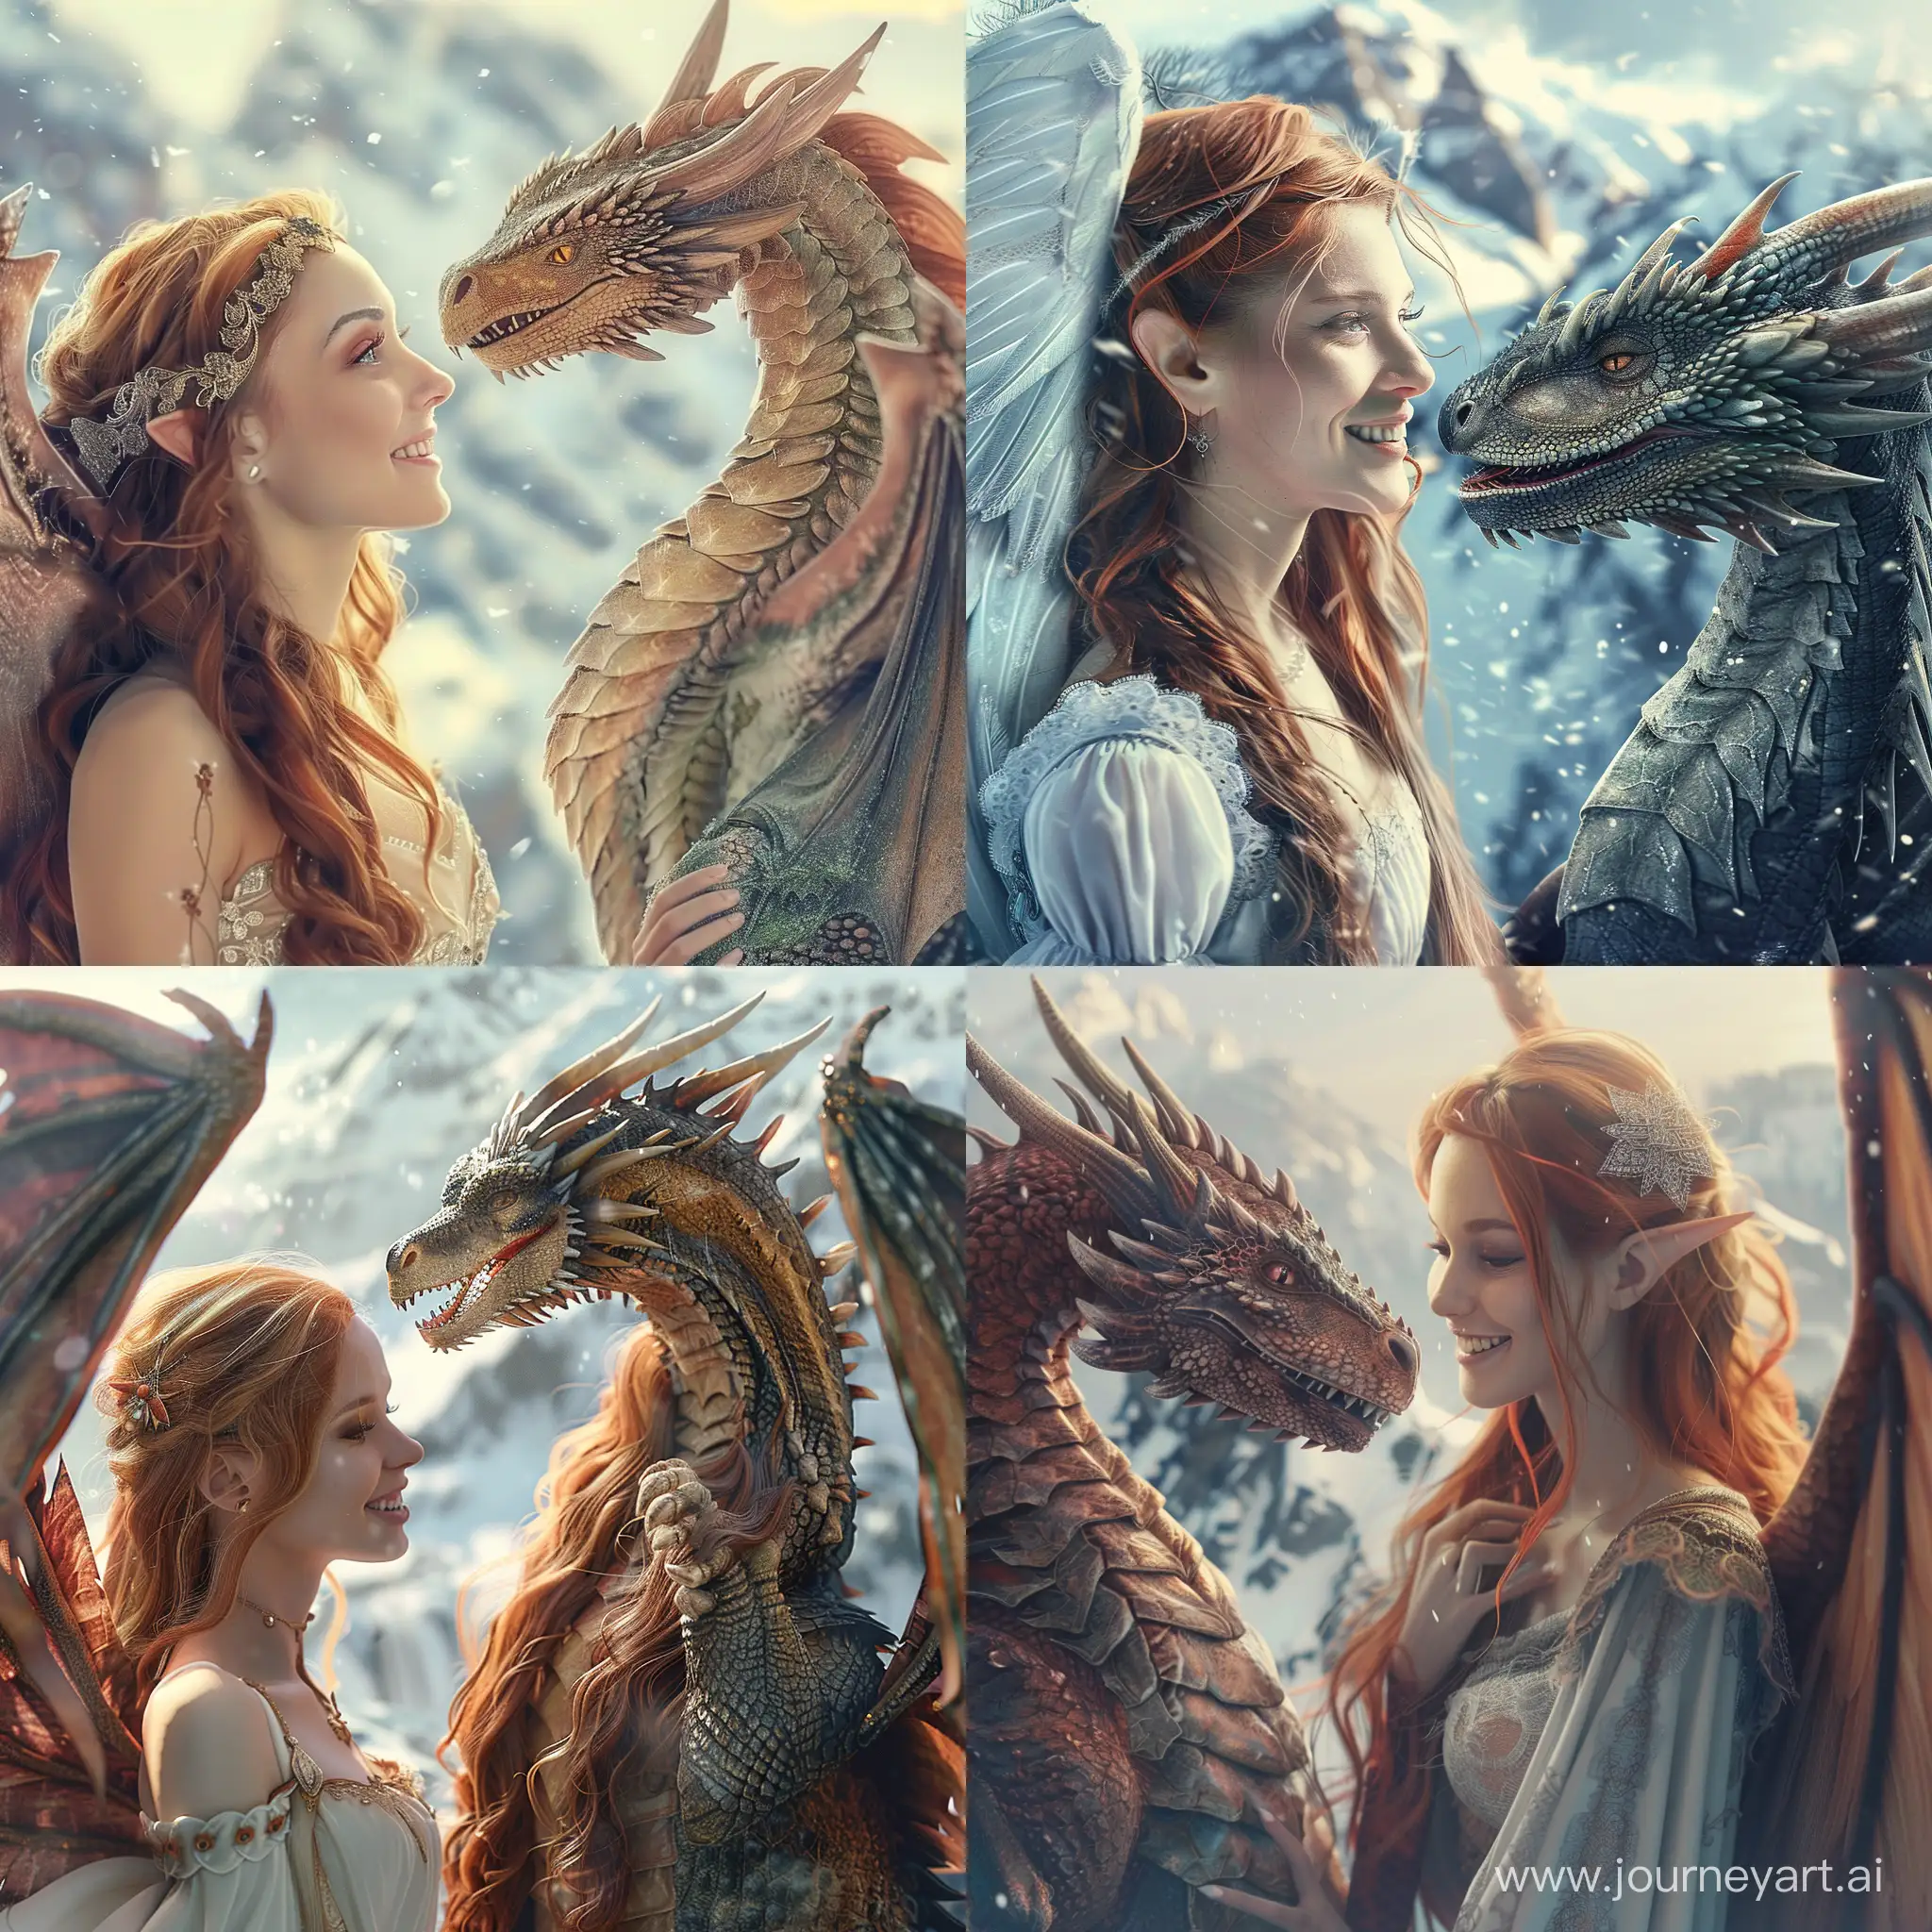 Enchanting-Medieval-Woman-with-Angel-Wings-and-Dragon-Companion-in-Snowy-Mountains